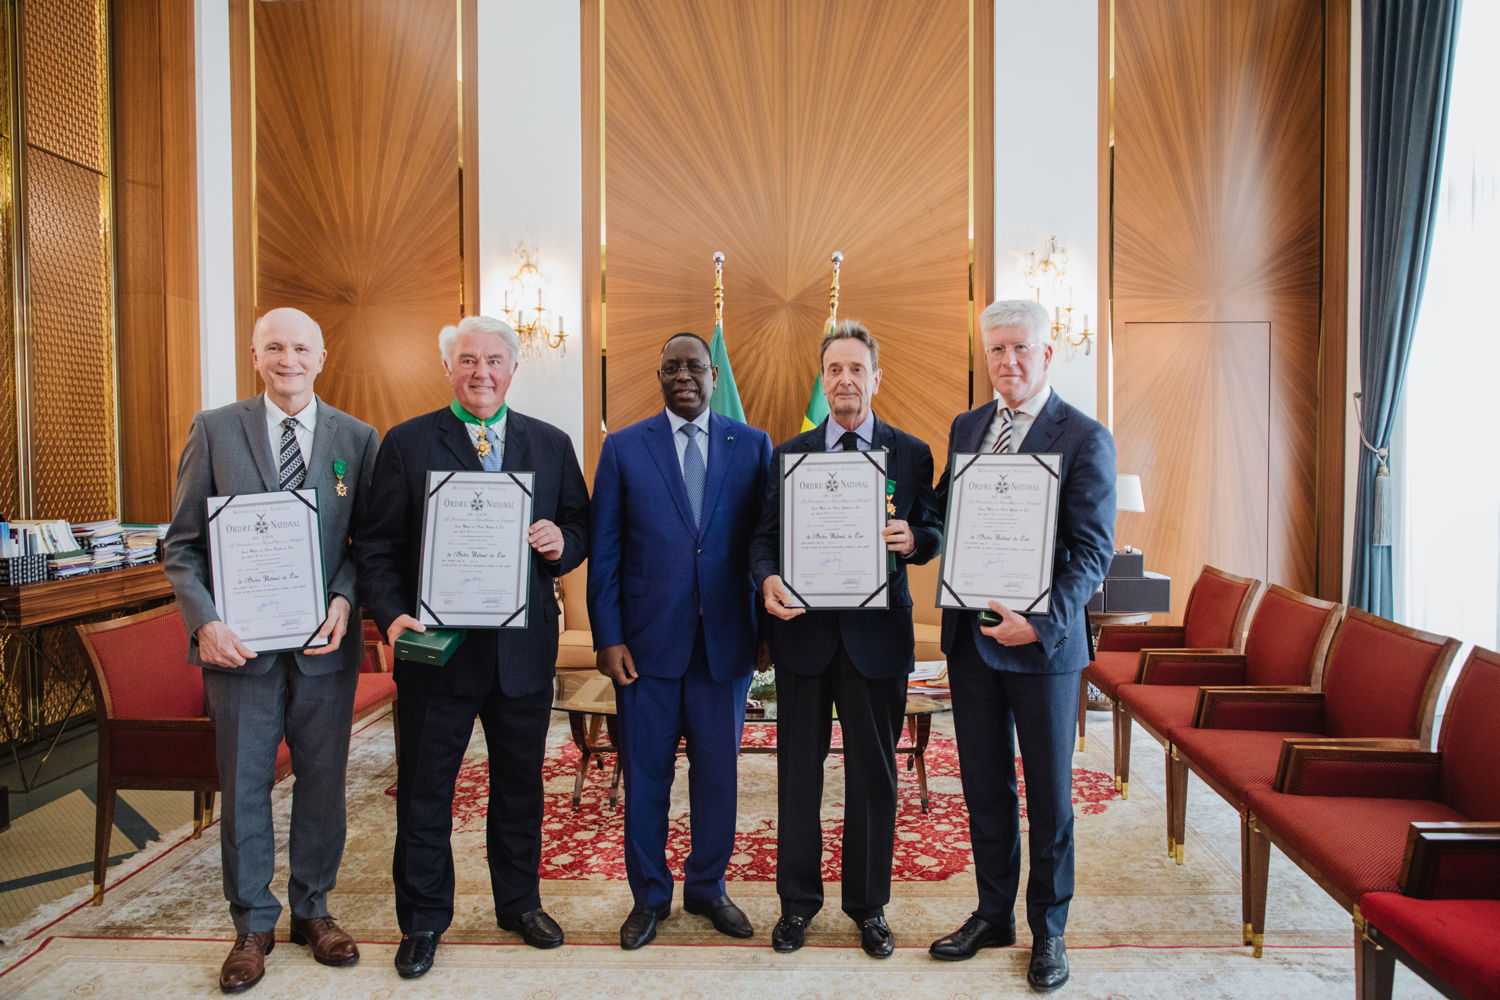 The Order of the Lion was bestowed on key Mercy Ships leaders by President of Senegal, Macky Sall.